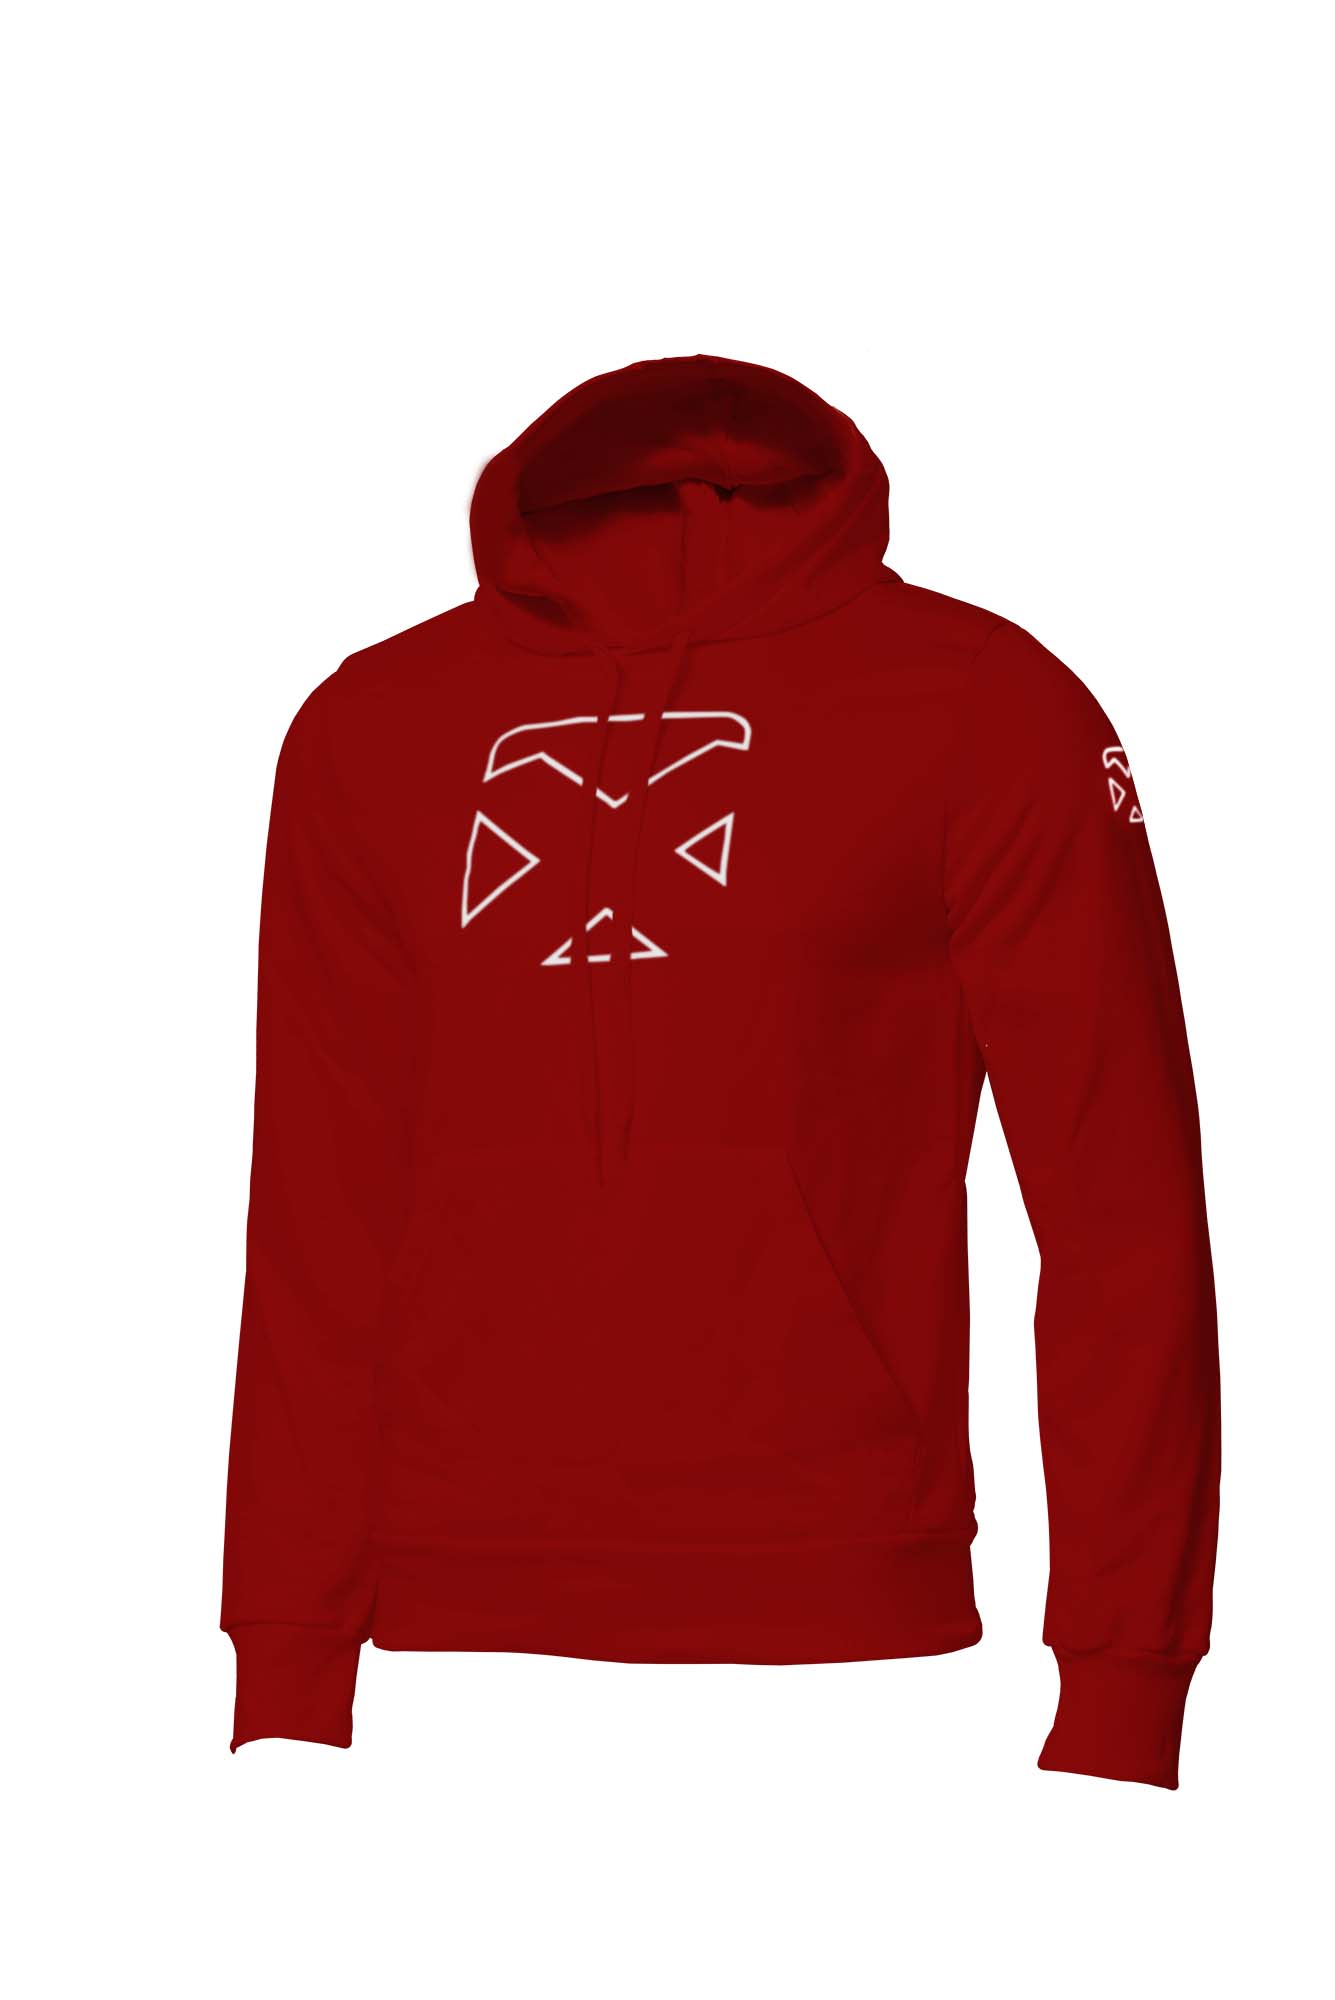 pacific court hoodie